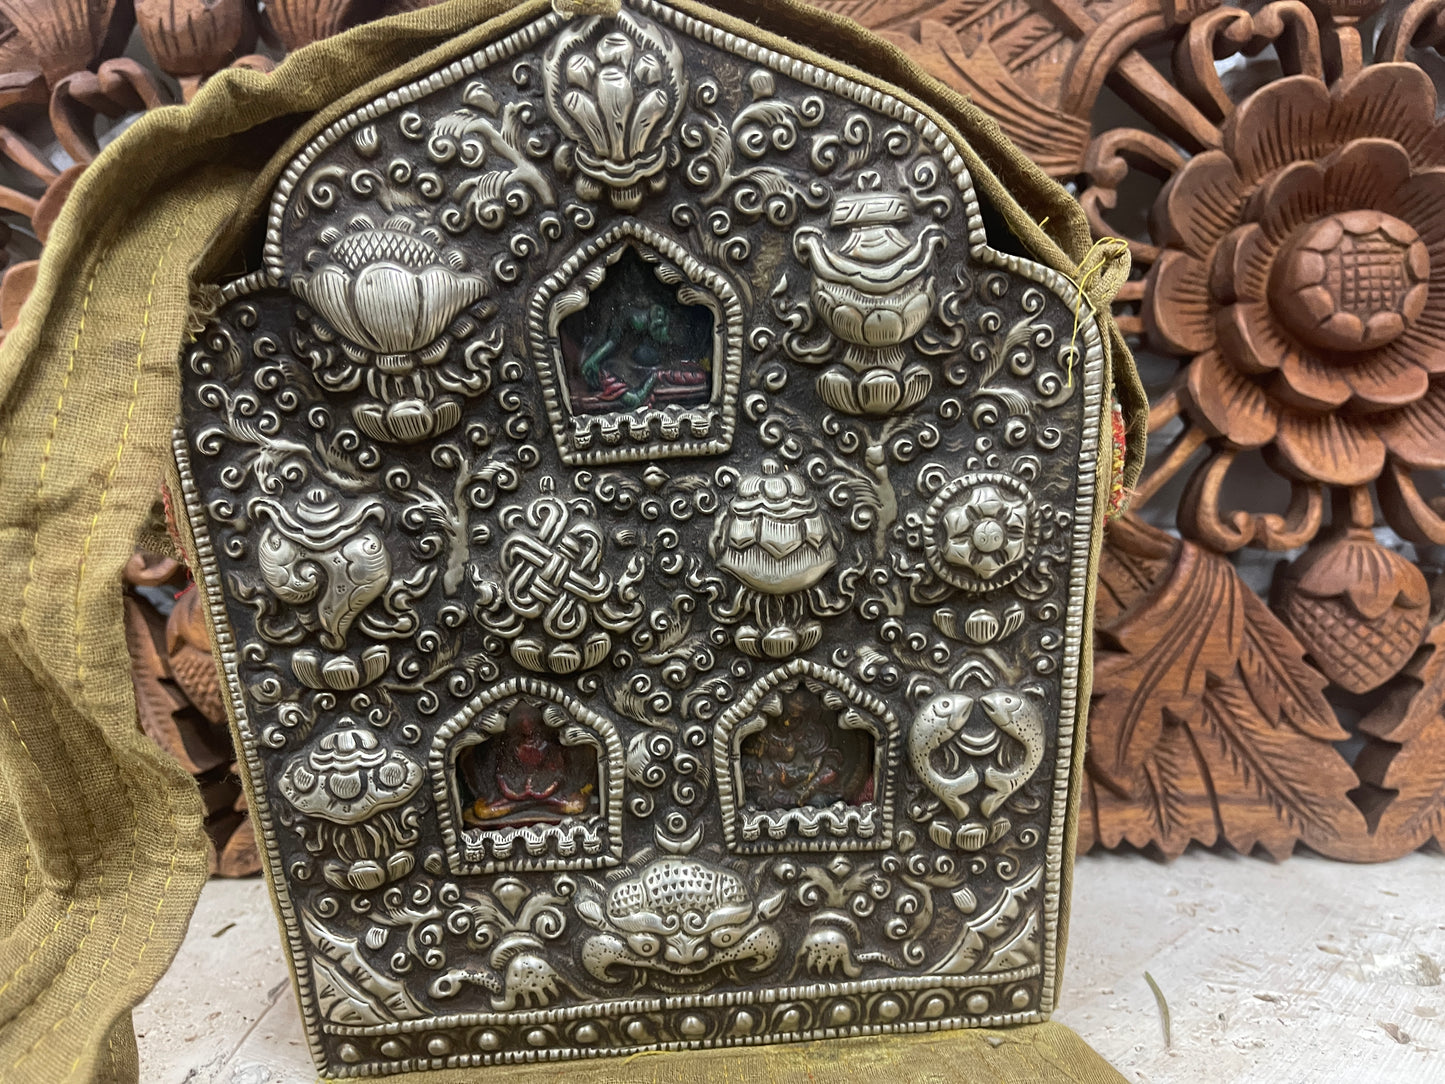 Antique Traveling Altar Boxes from Tibet- With Buddha or Tara- One of a kind